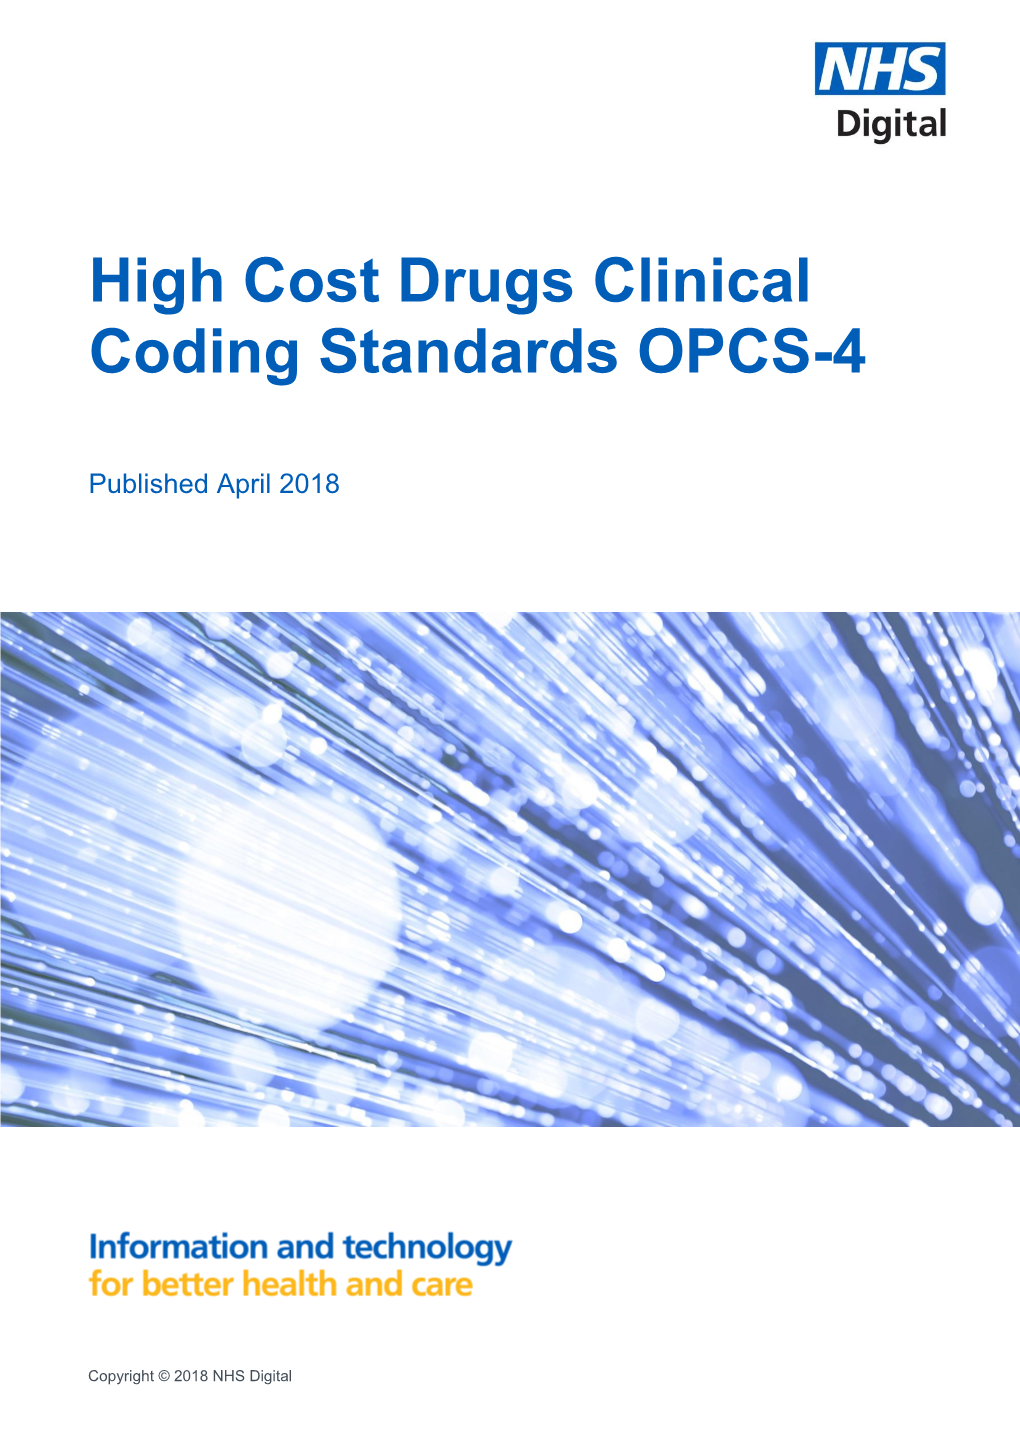 High Cost Drugs Clinical Coding Standards OPCS-4